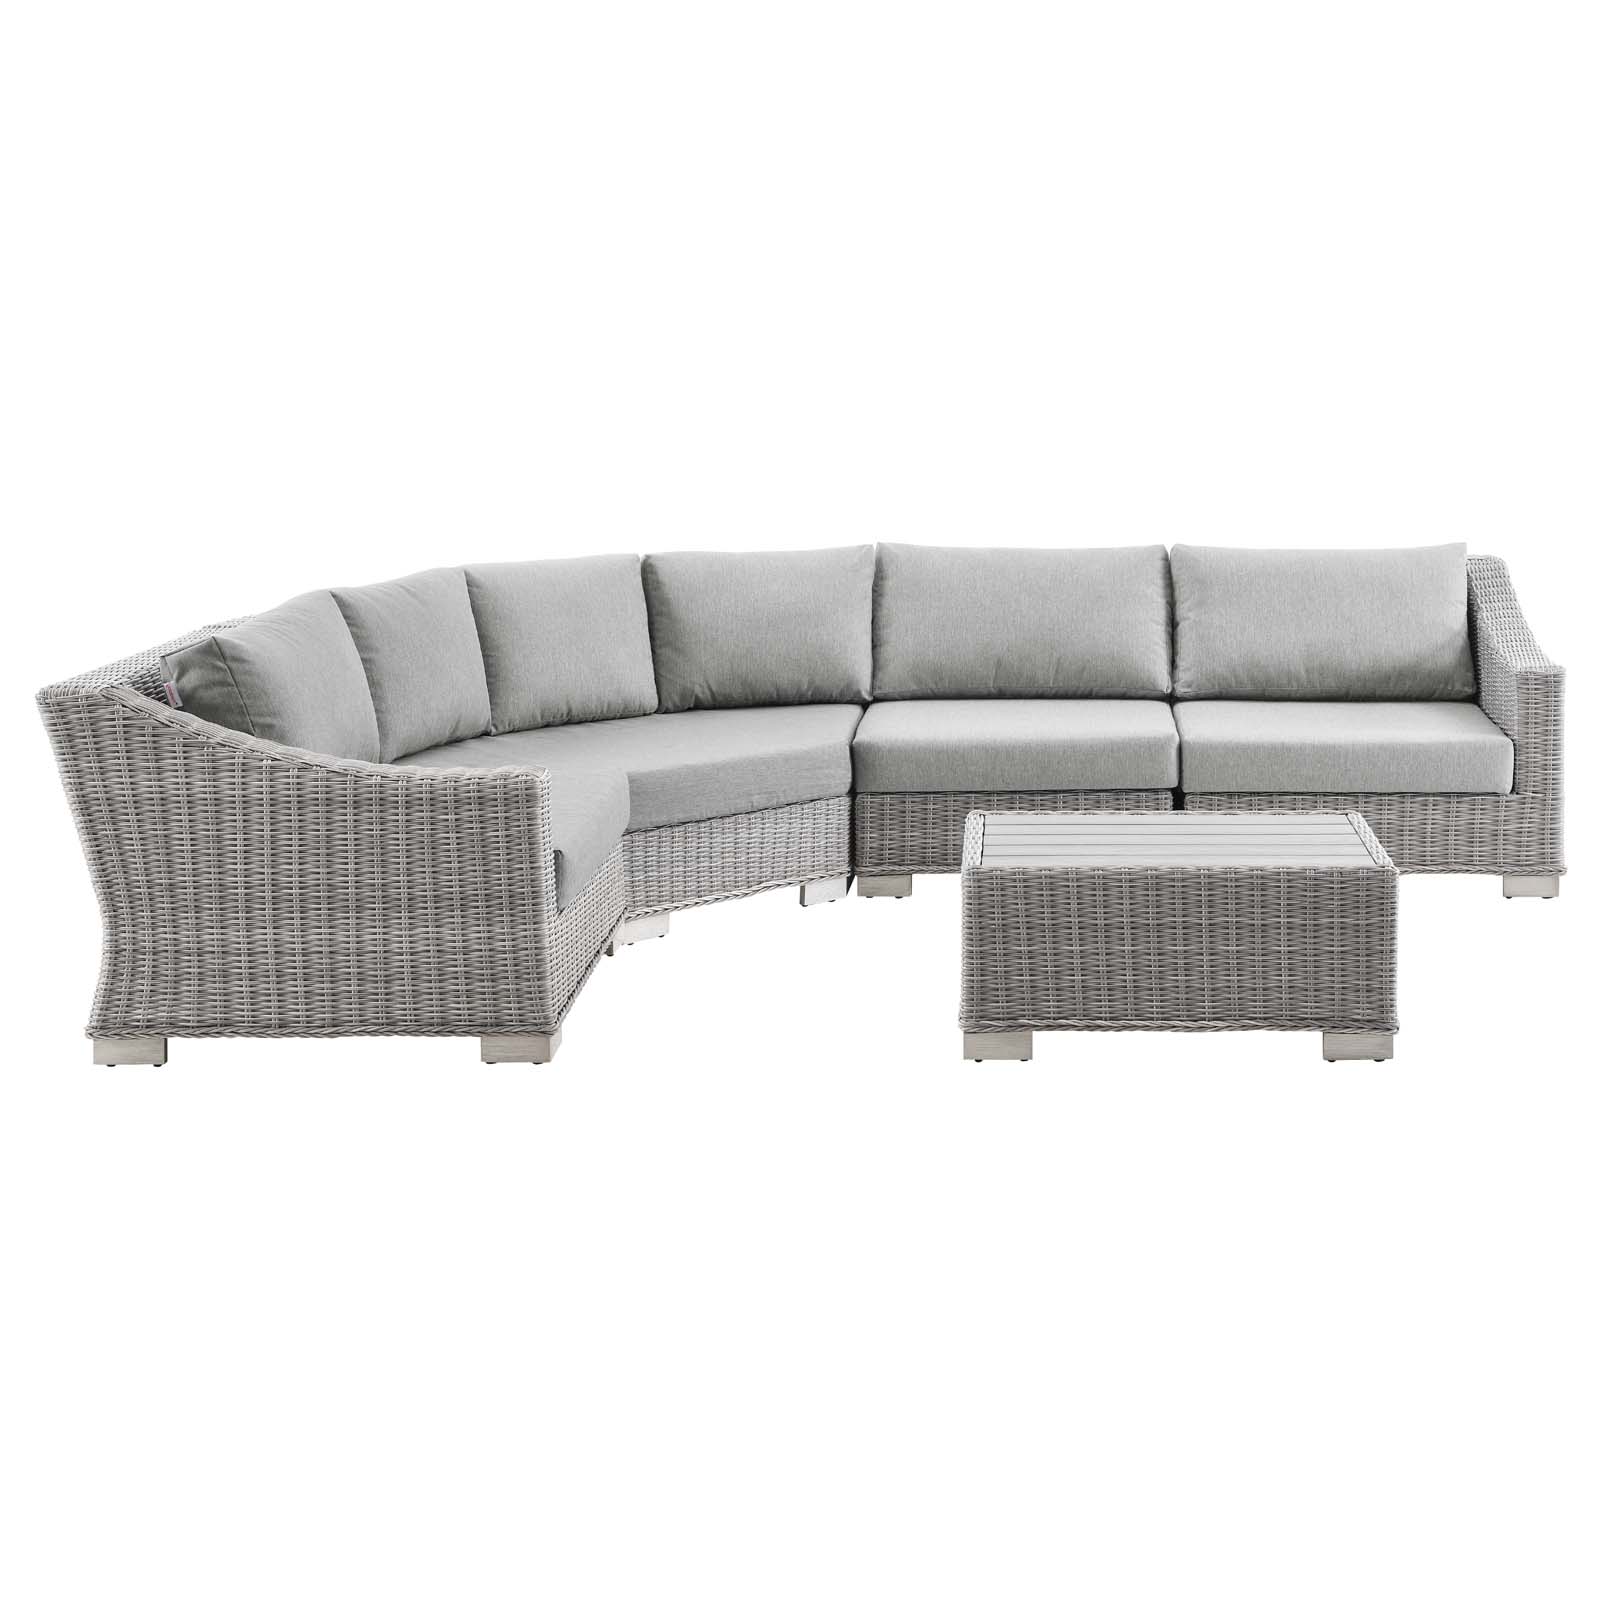 Lounge Sectional Sofa Chair Table Set, Rattan, Wicker, Grey Gray, Modern Contemporary Urban Design, Outdoor Patio Balcony Cafe Bistro Garden Furniture Hotel Hospitality - image 1 of 10